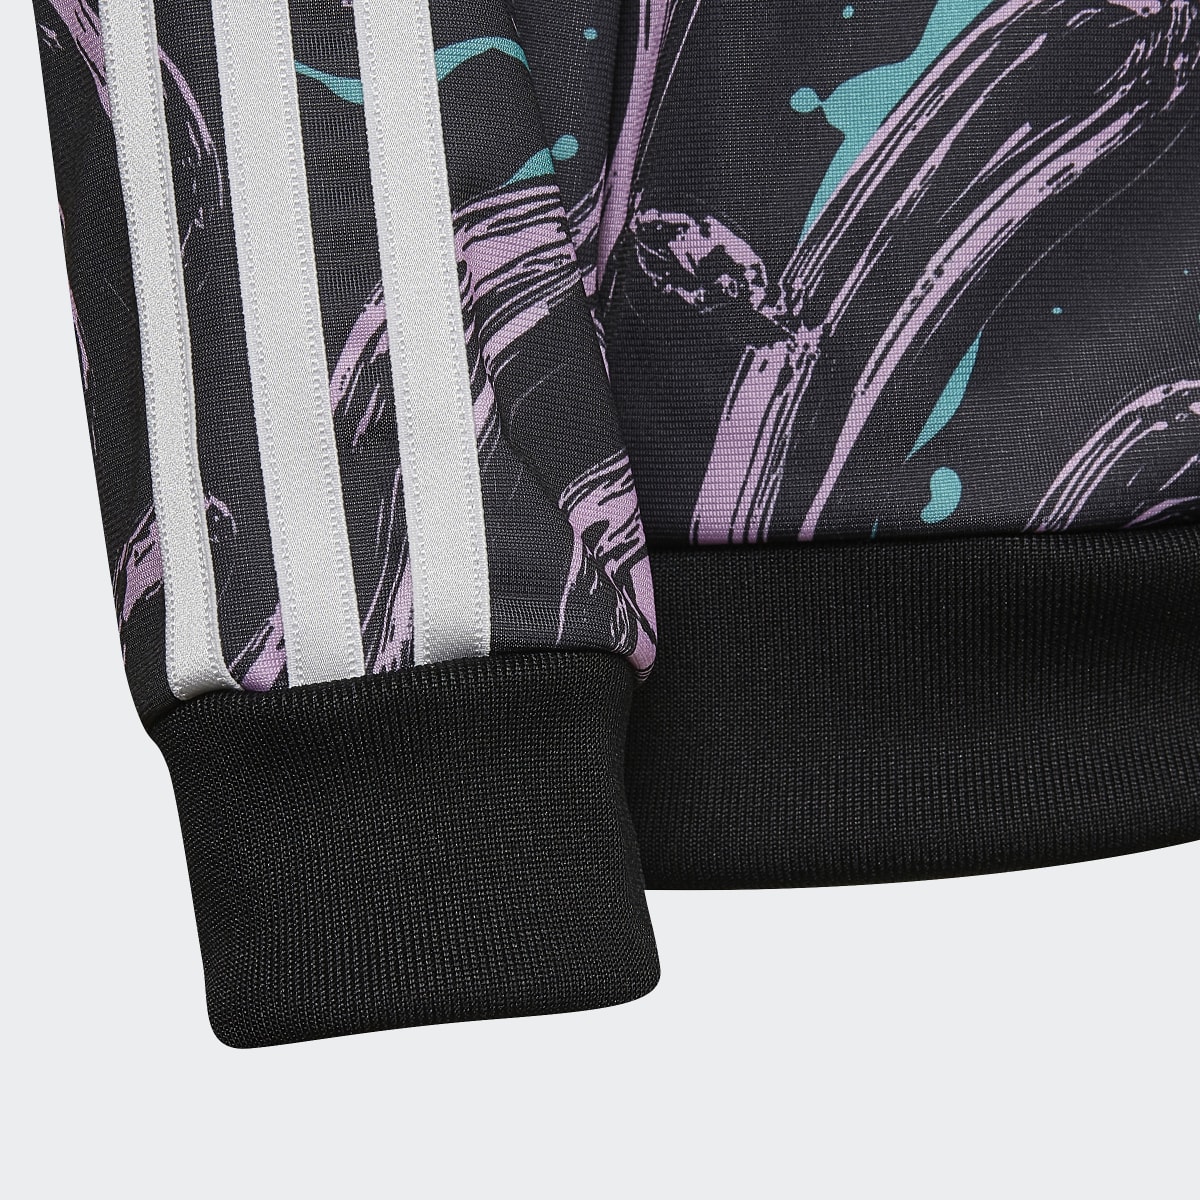 Adidas Allover Print SST Track Top. 5